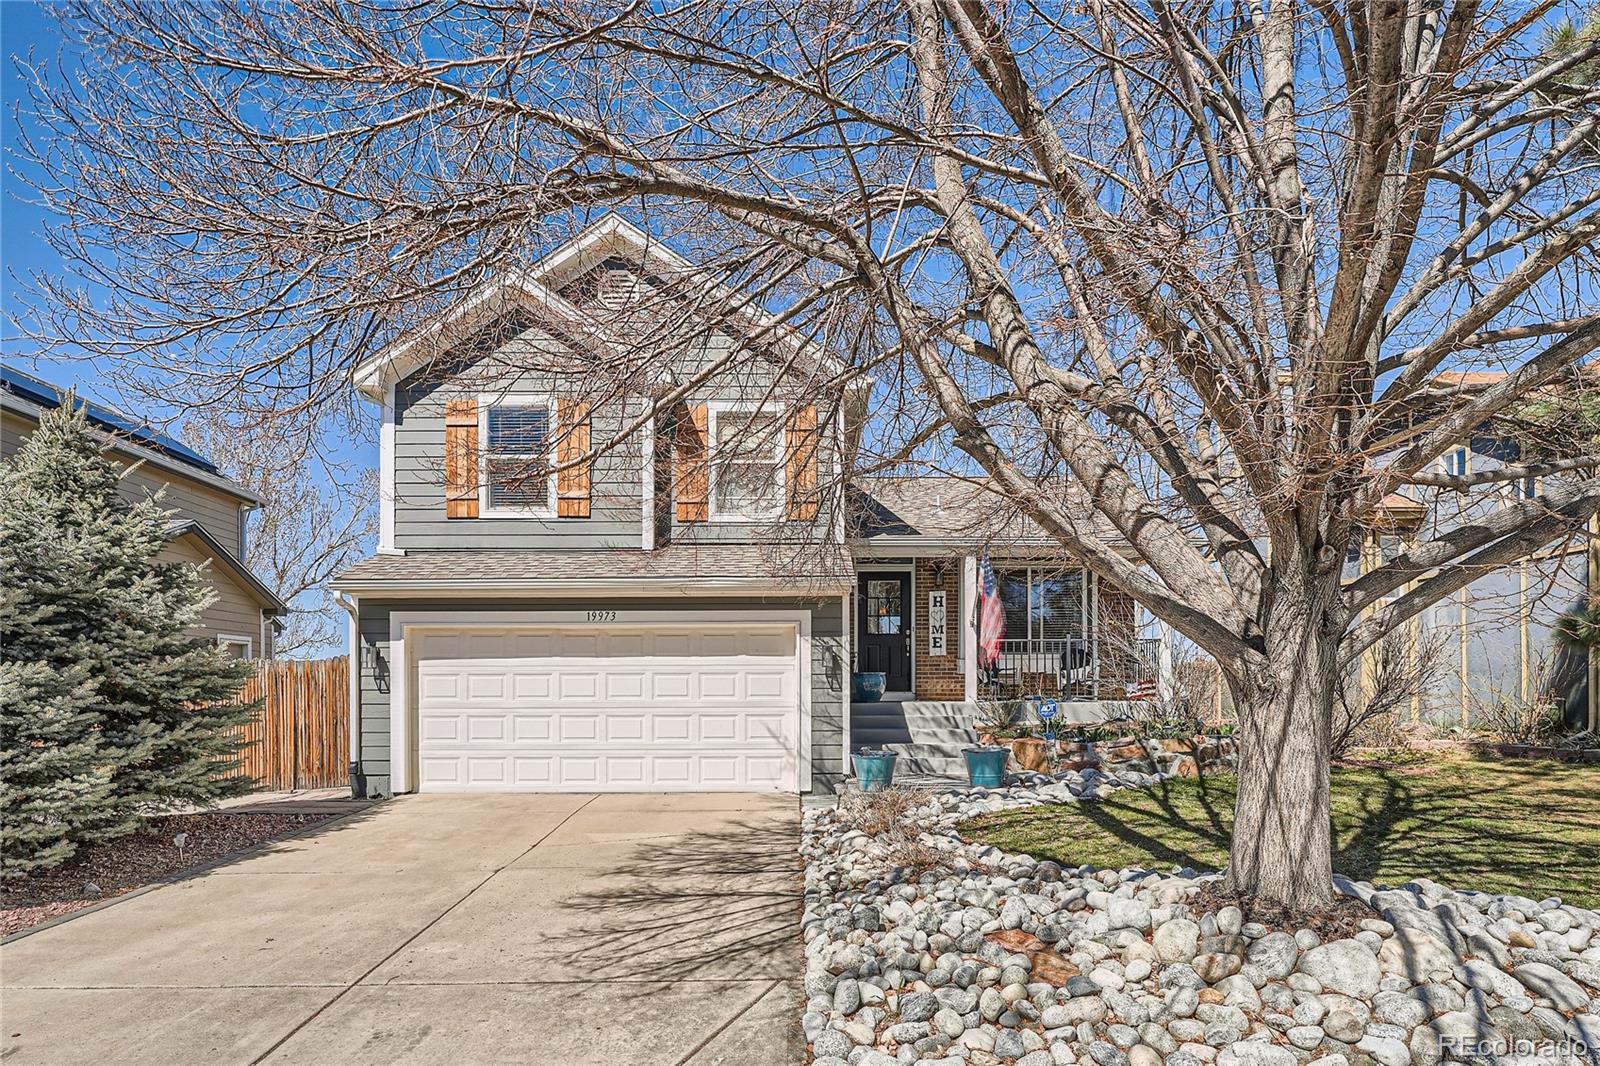 19973 e oberlin place, aurora sold home. Closed on 2024-04-29 for $539,900.